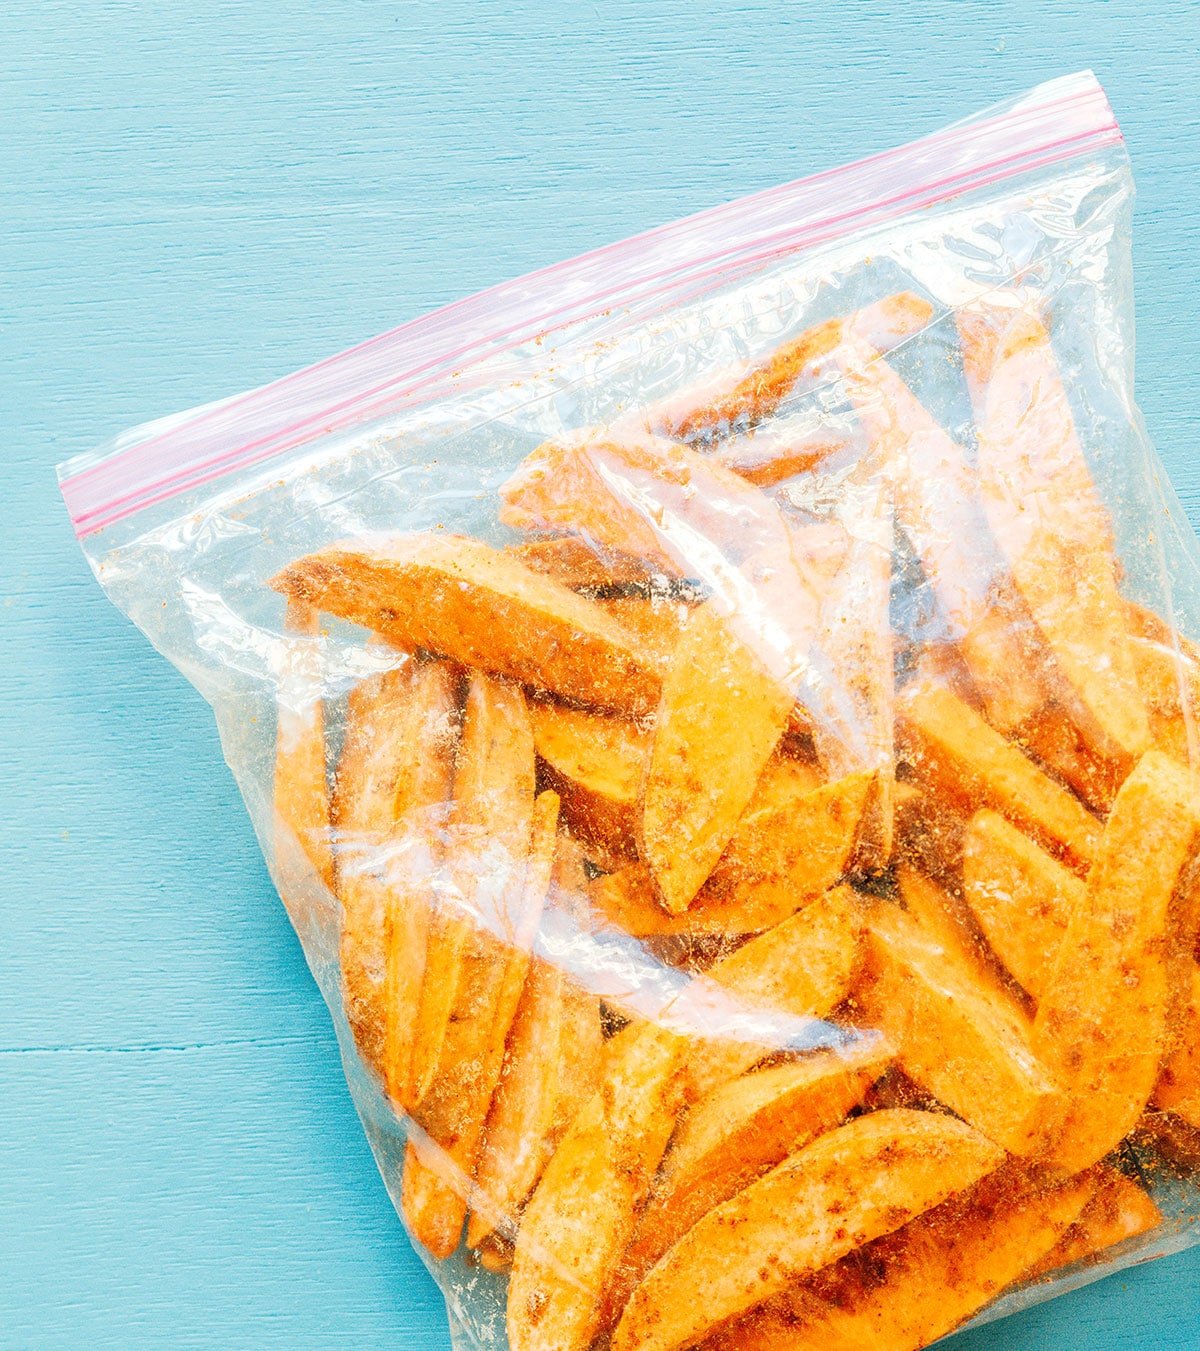 A Ziploc bag filled with sweet potato wedges and coated in olive oil and seasonings